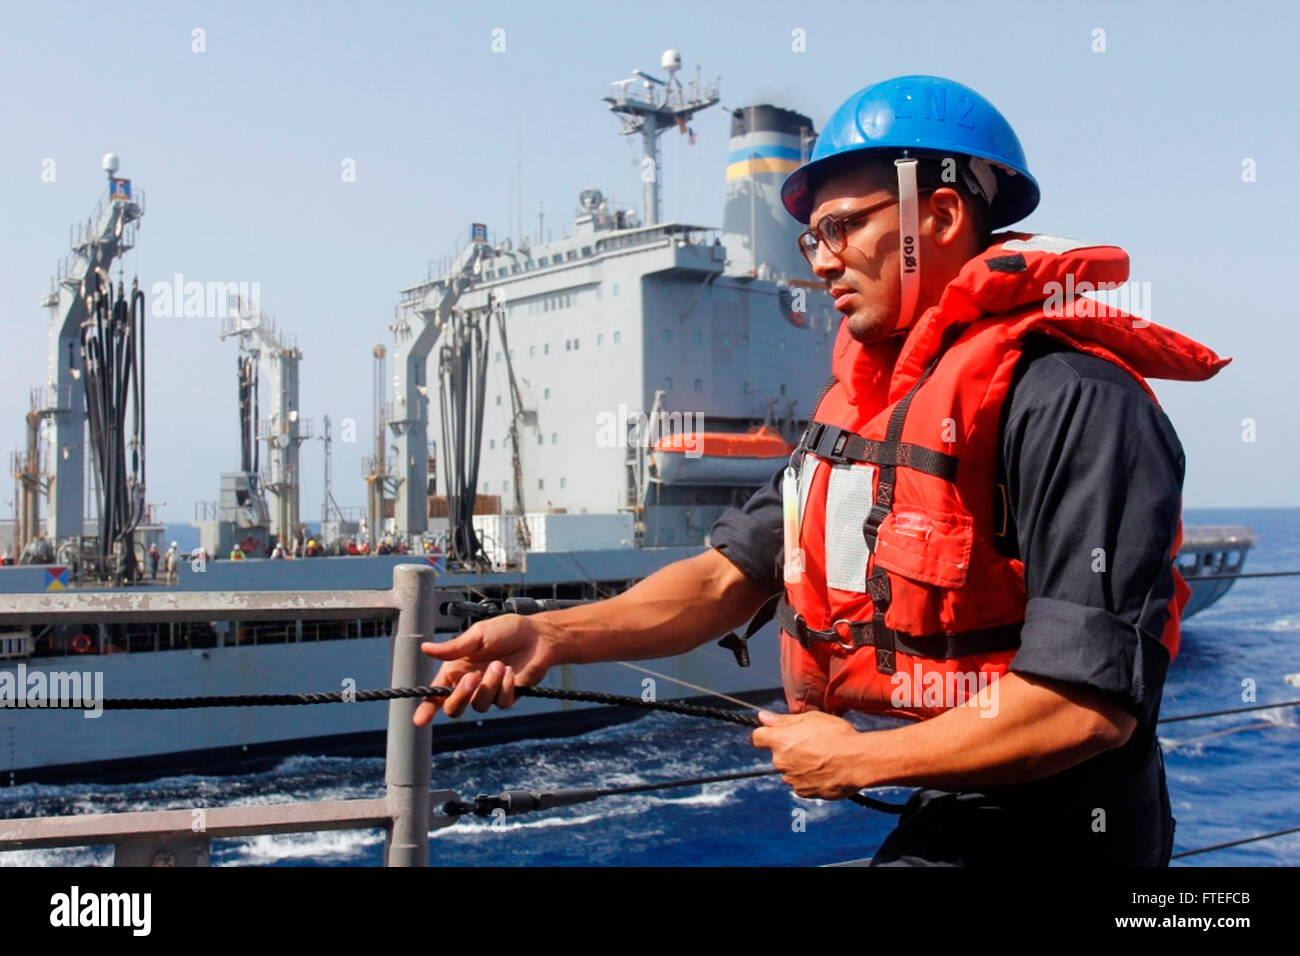 140727-N-KT328-003  MEDITERRANEAN (July 27, 2014) – Personnel Specialist 2nd Class Noe Garcia hauls in the station to station phone line aboard the guided-missile frigate USS Samuel B. Roberts (FFG-58) during a replenishment-at-sea with replenishment oiler USNS Patuxent (T-AO-201). Samuel B. Roberts, homeported in Mayport, Fla., is conducting naval operations in the U.S. 6th Fleet area of operations in support of U.S. national security interests in Europe and Africa. (U.S. Navy photo by Ensign Evan Albright) Stock Photo